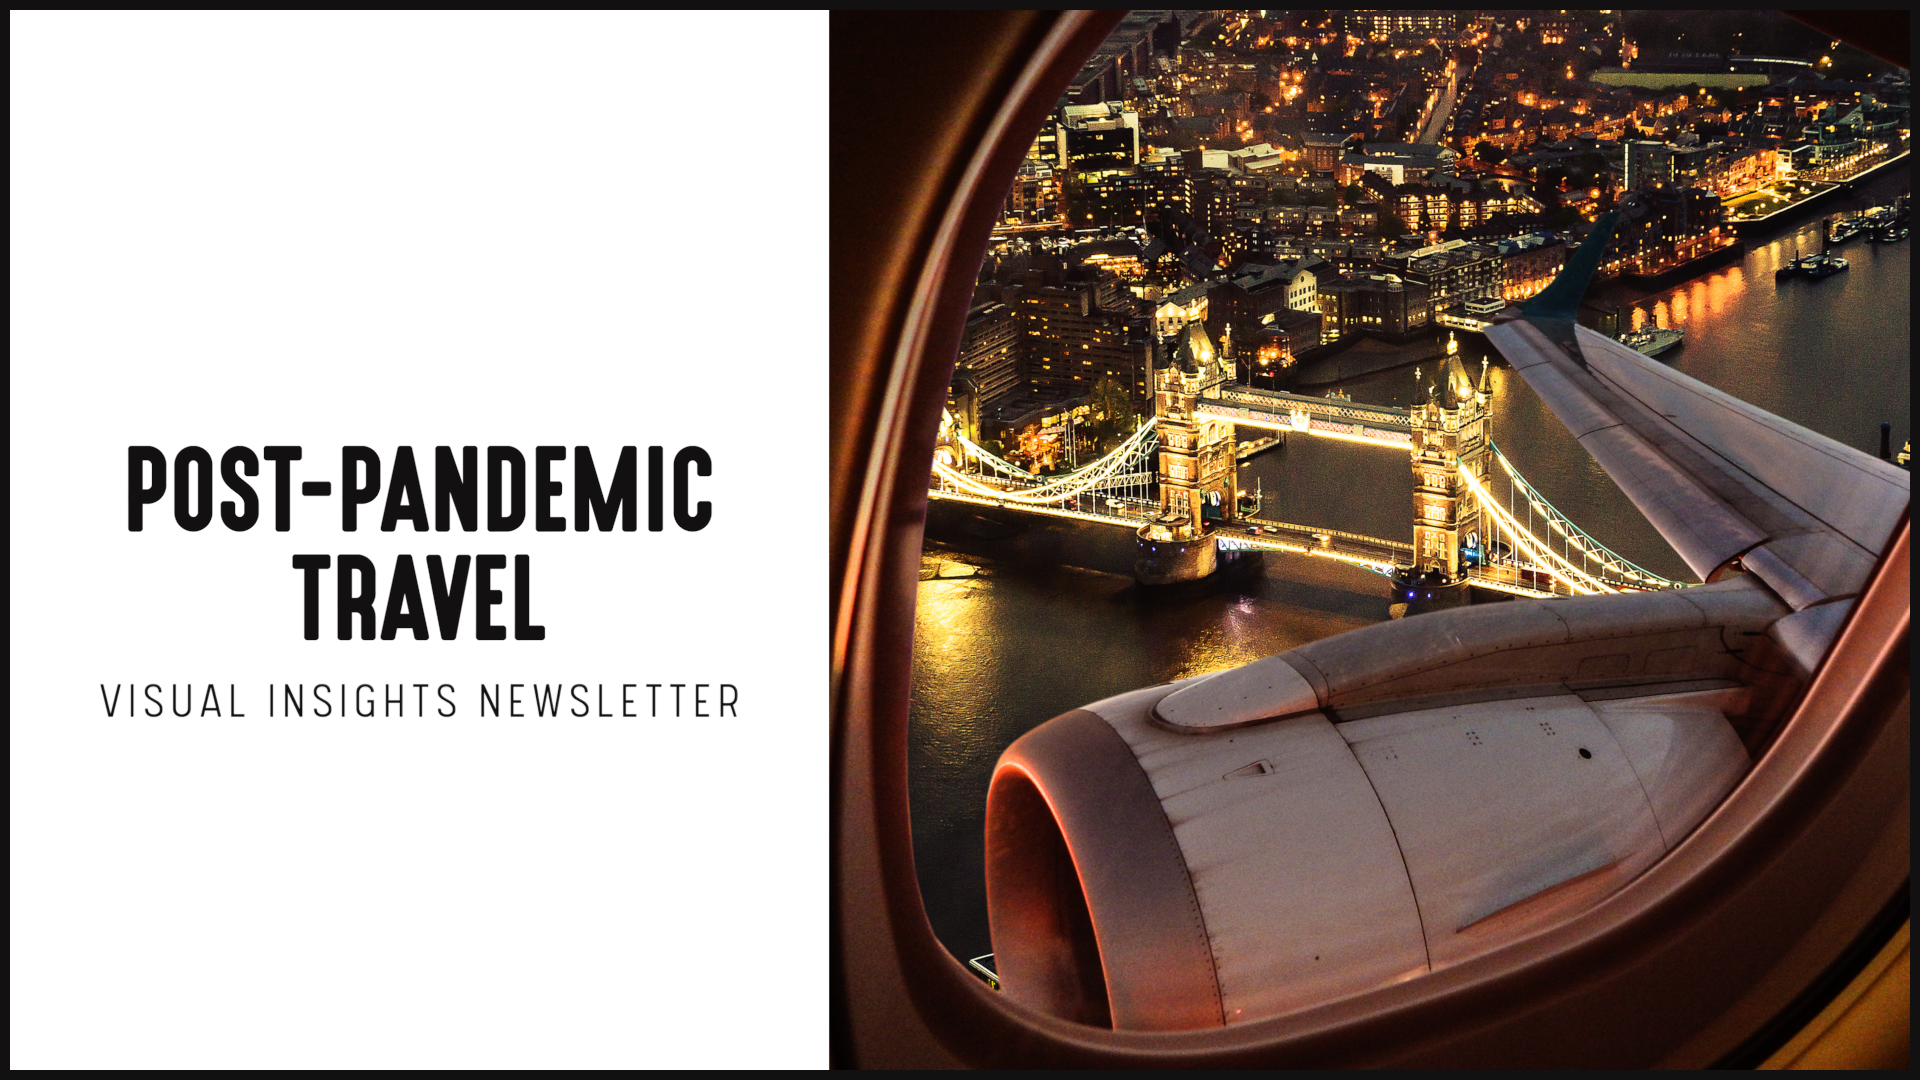 [NEW] Visual Insights Newsletter | Post-Pandemic Travel